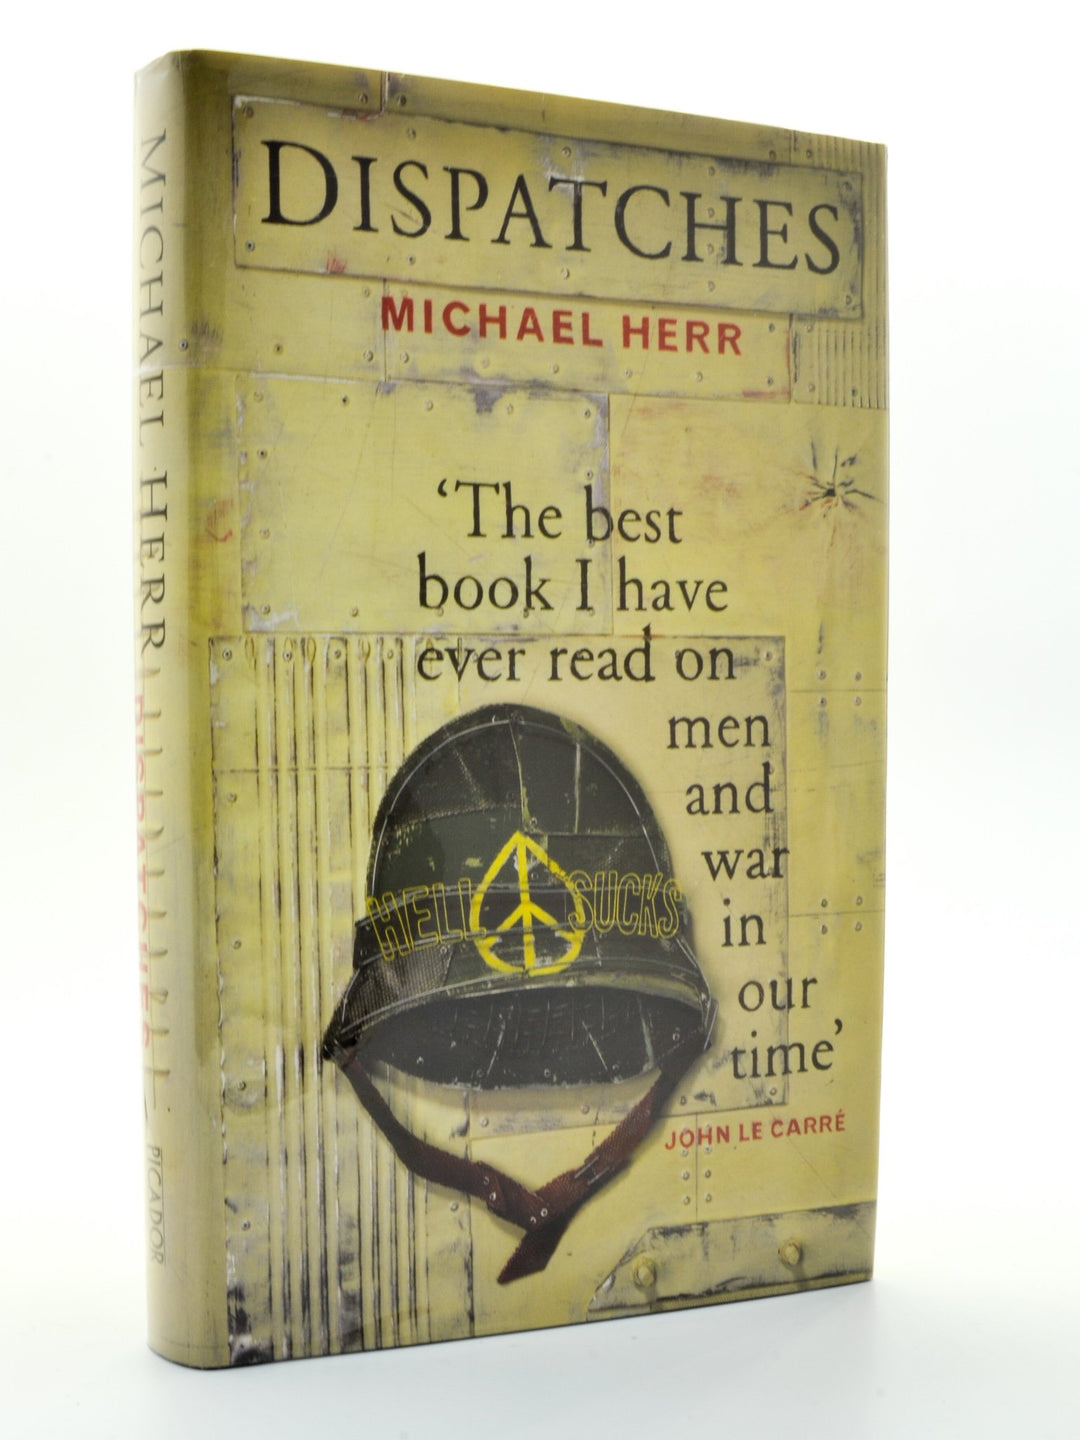 Herr, Michael - Dispatches | back cover